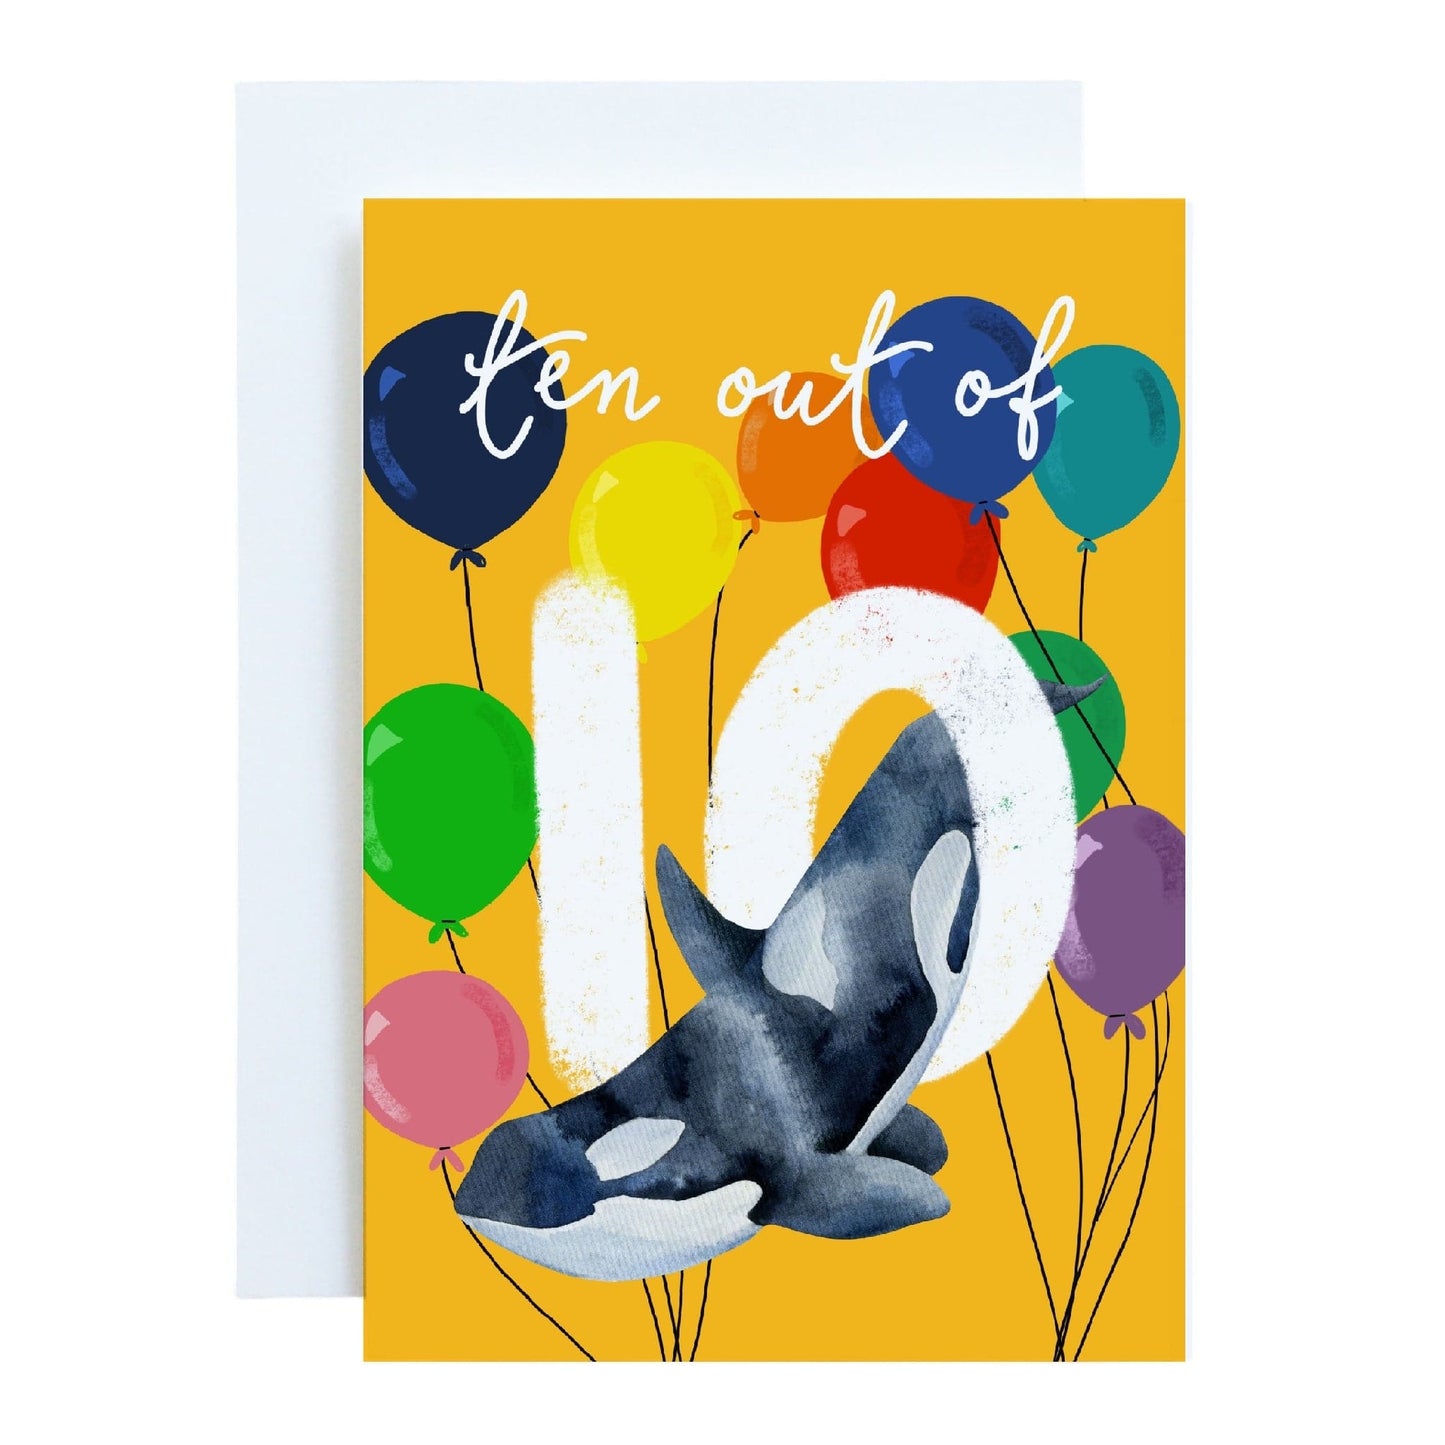 Orca Whale Tenth birthday Card - Bright “Ten out of 10” And Hope Designs Cards